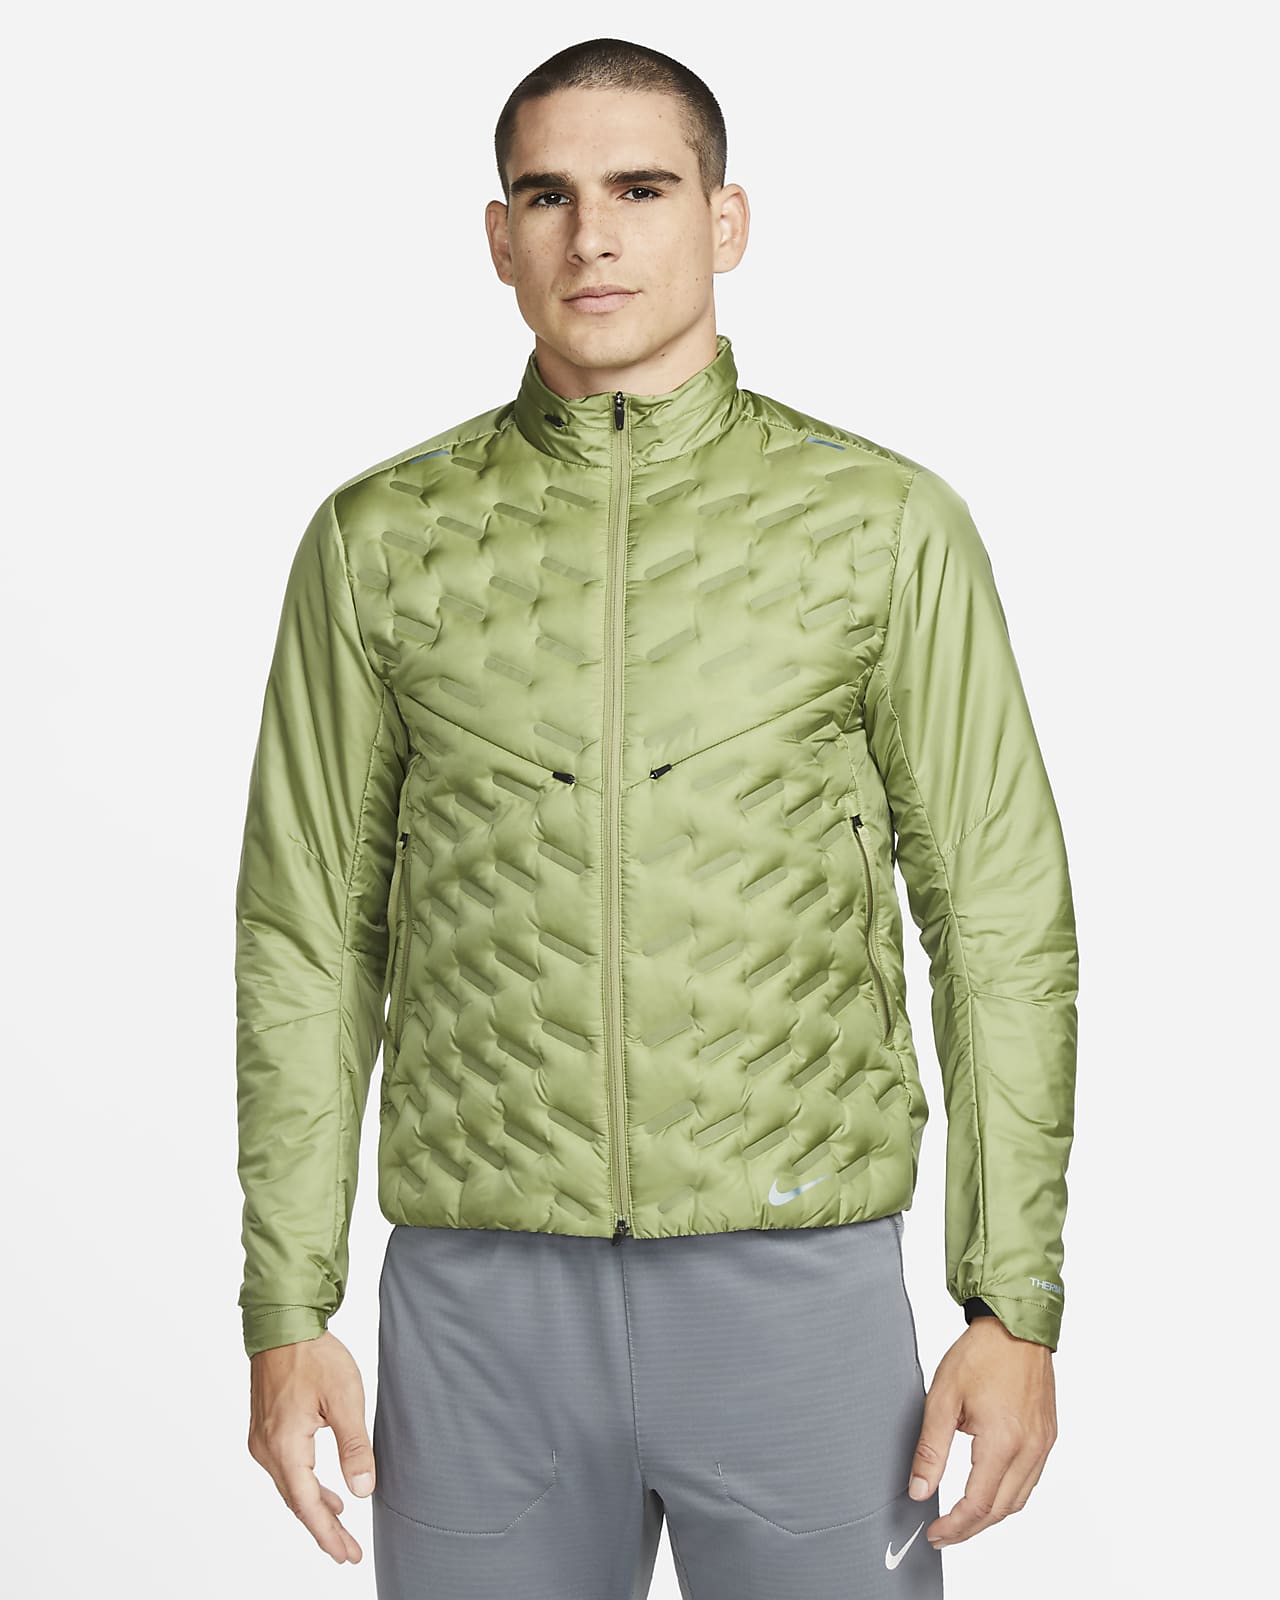 Therma-FIT Repel Men's Down-Fill Running Jacket. Nike